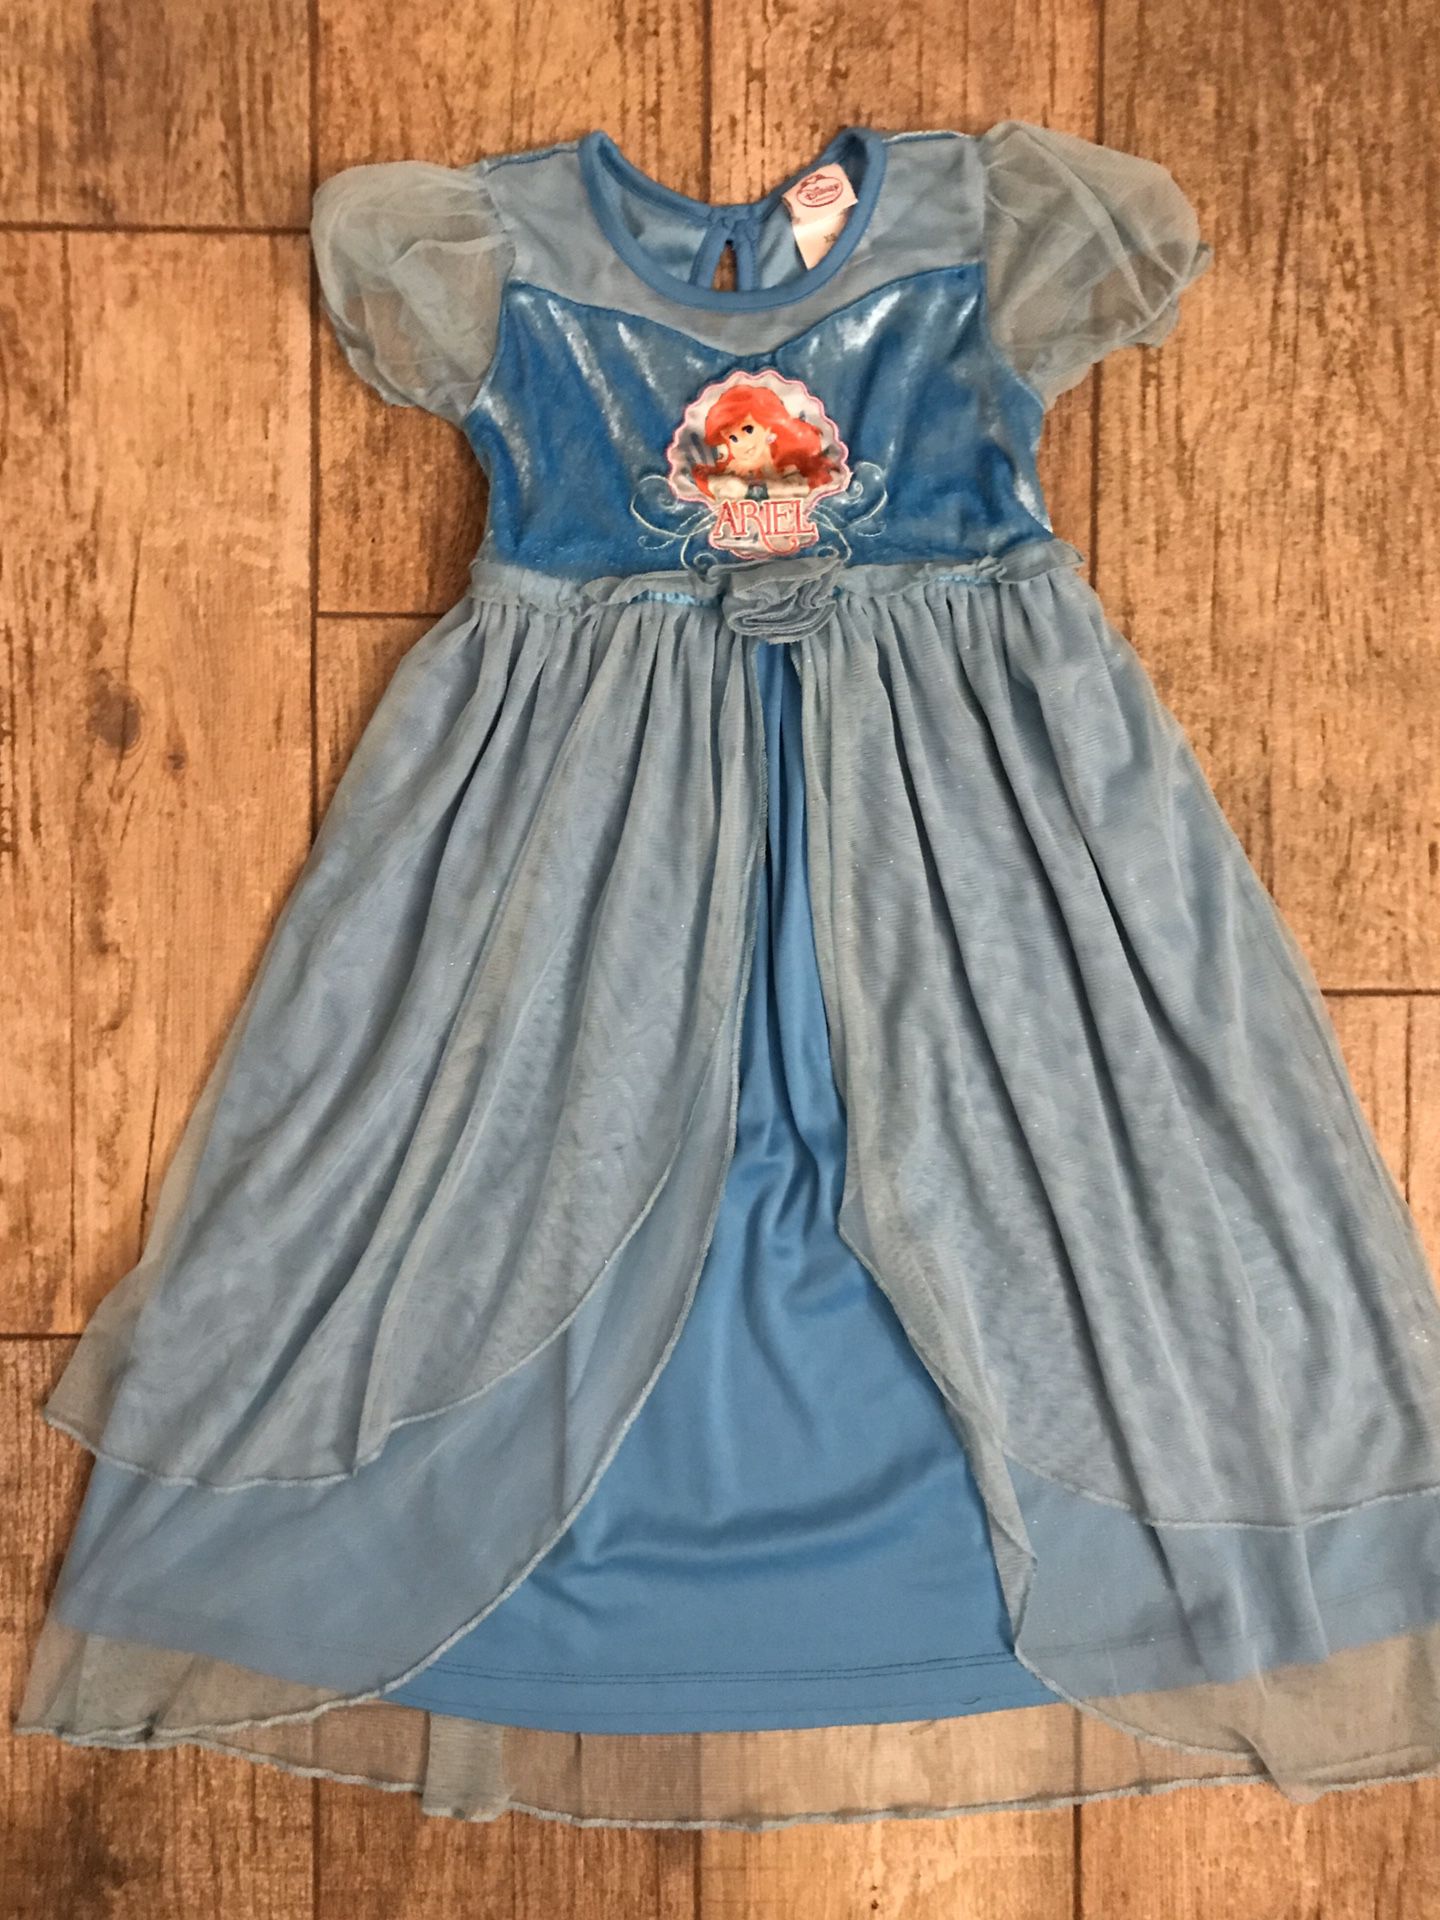 Disney Princess - Little Mermaid - Princess Ariel - Nightgown - Size XS (4-5) •If Is Posted Is Available•